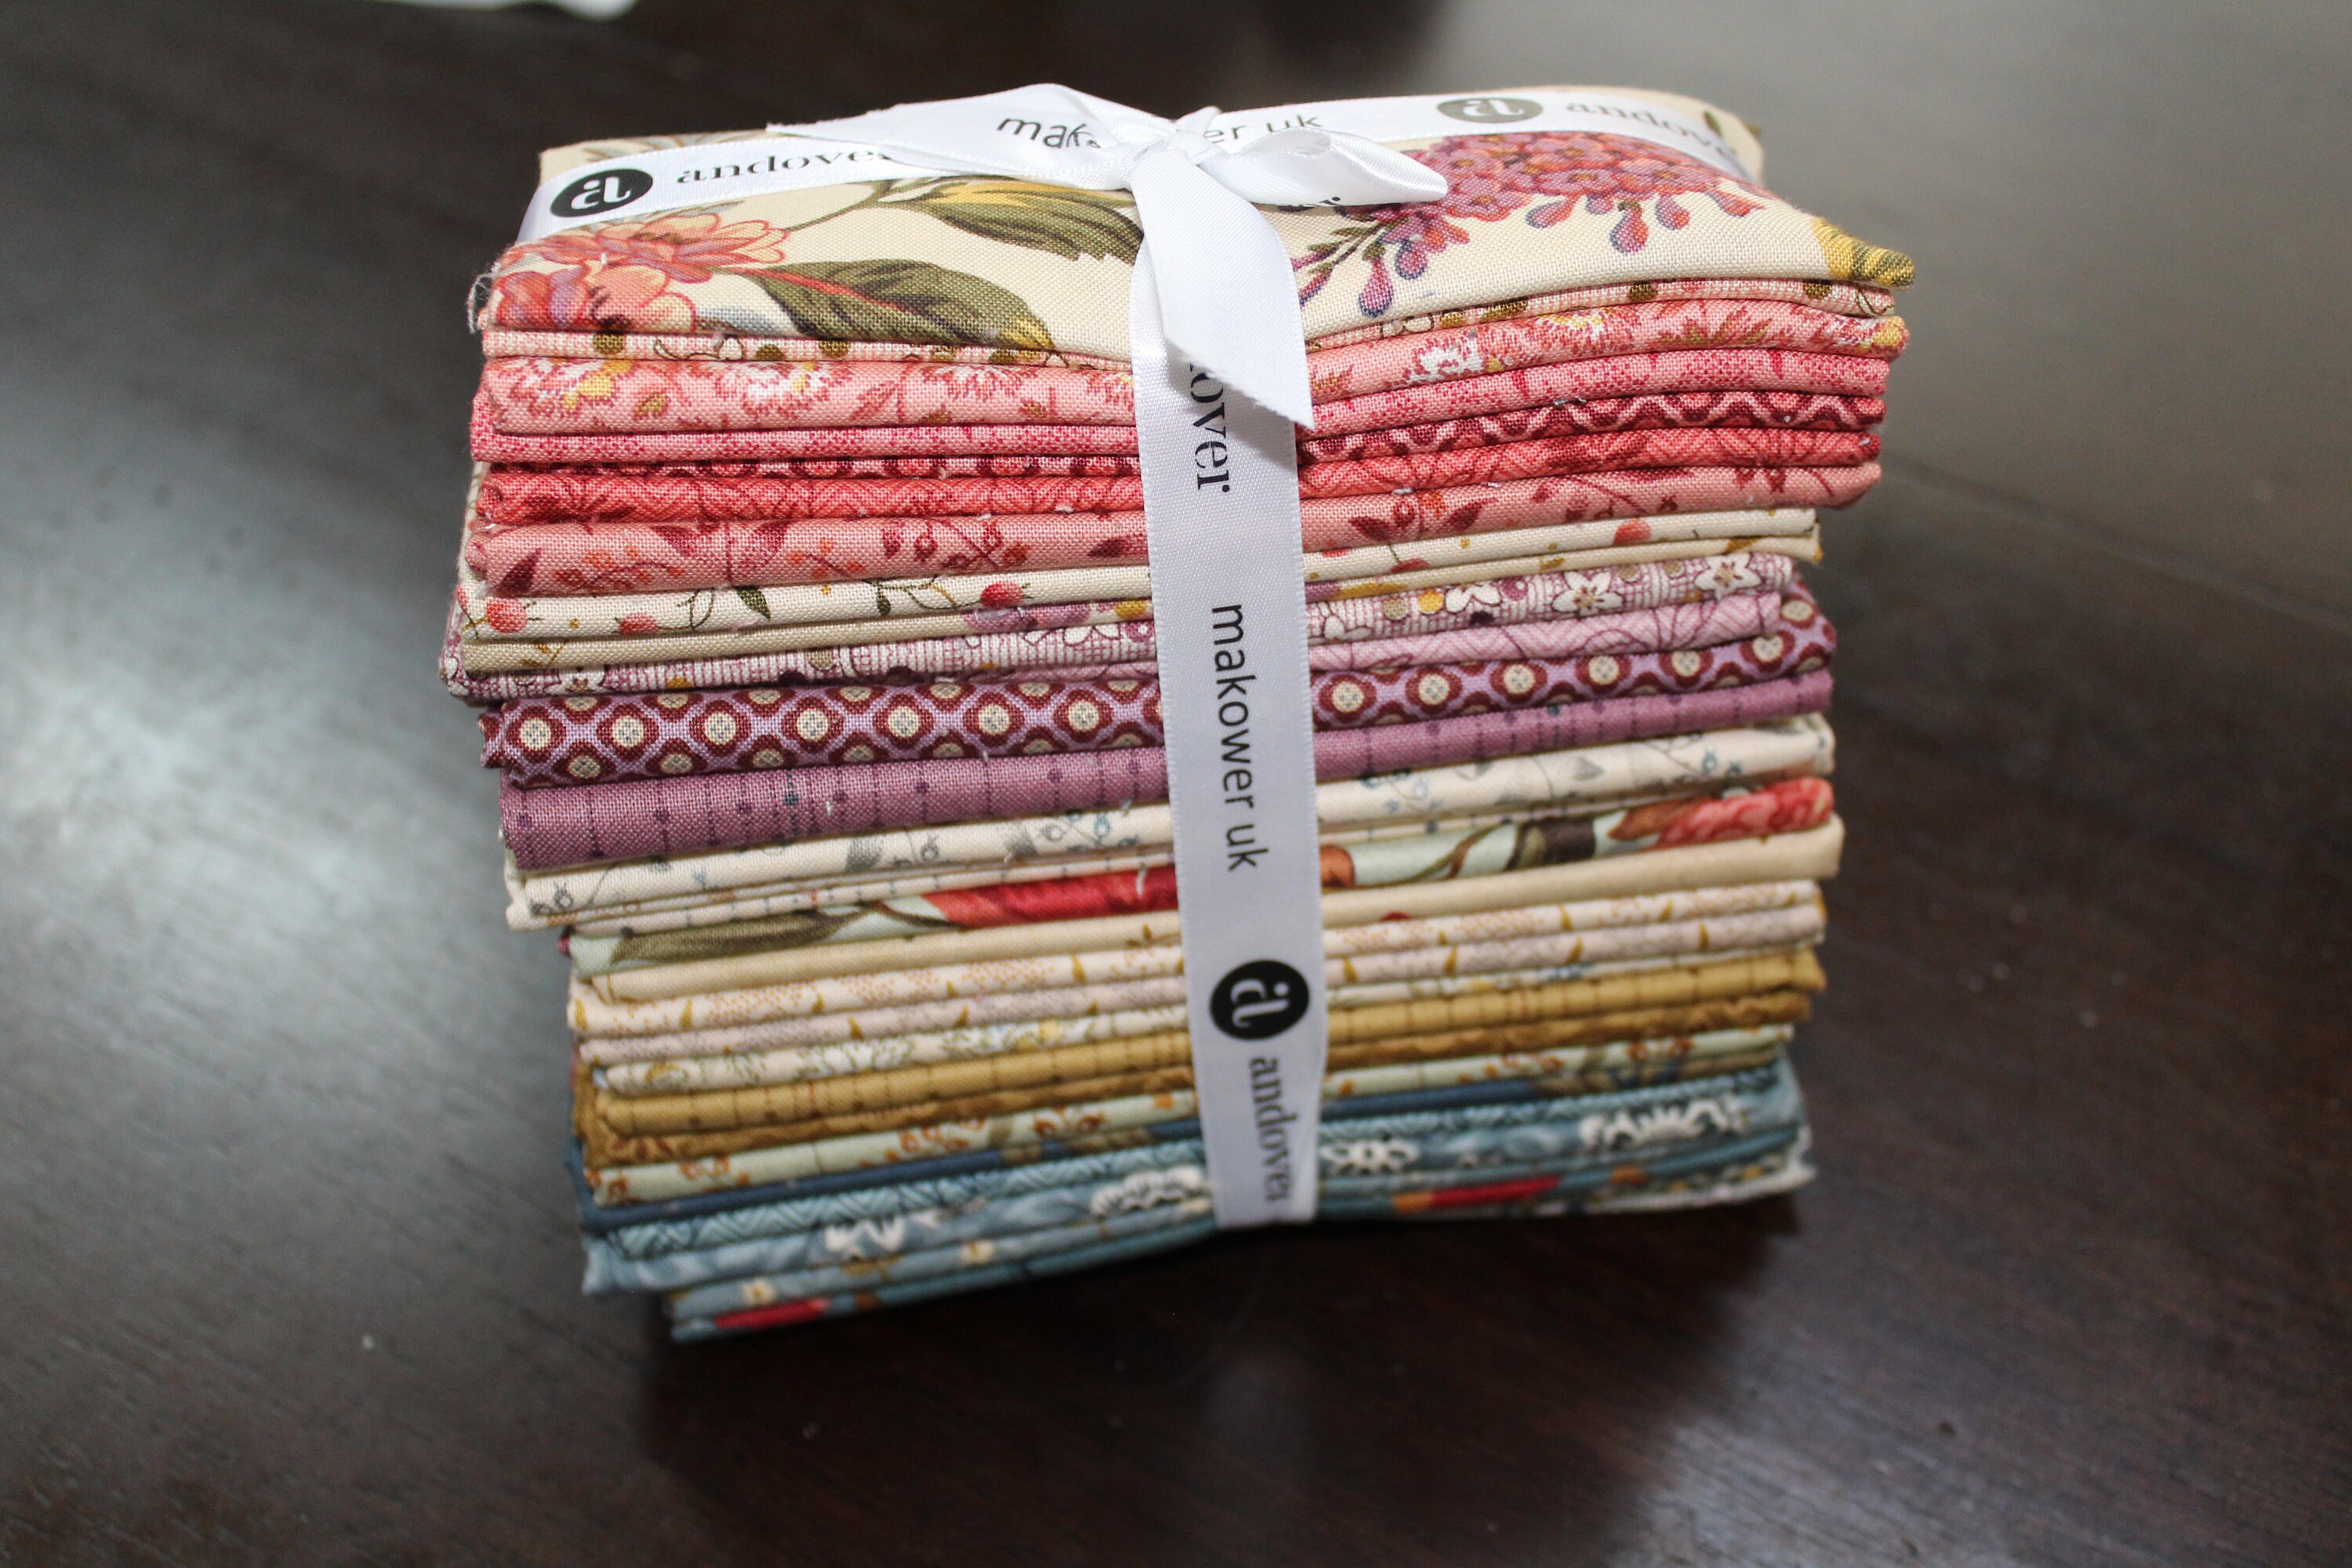 The Seamstress Fat Quarter Fabric Bundle - Andover Fabric - Edyta Sitar  Laundry Basket Quilts Fabric Collection - 1/4 Yard Set of 36 Fabrics